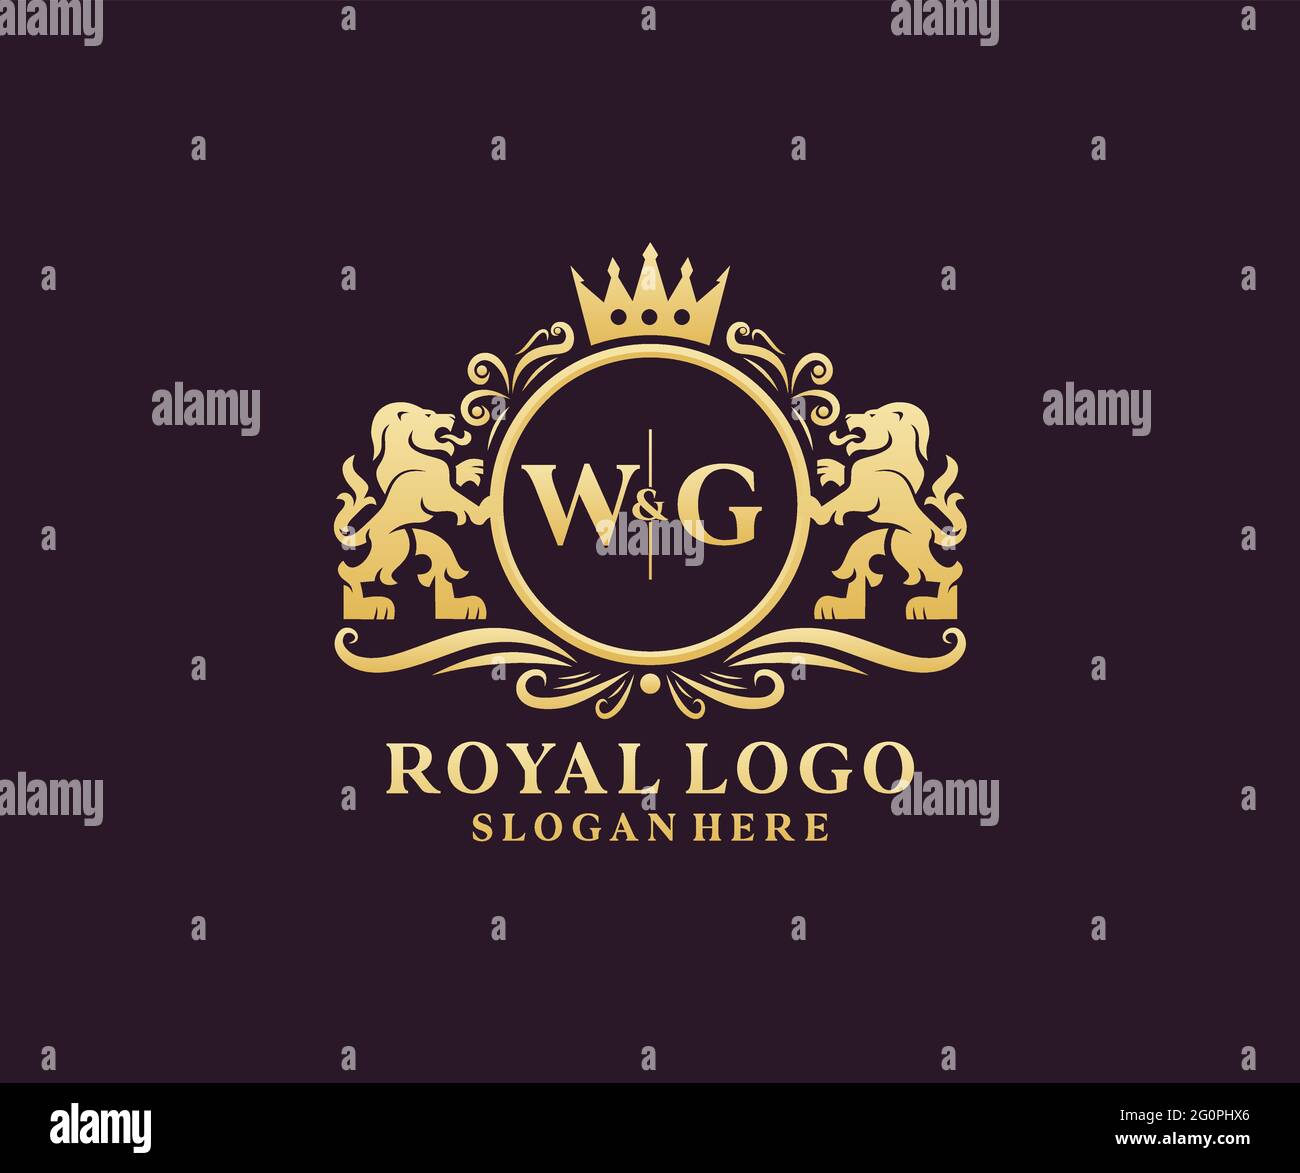 WG Letter Lion Royal Luxury Logo template in vector art for Restaurant, Royalty, Boutique, Cafe, Hotel, Heraldic, Jewelry, Fashion and other vector il Stock Vector